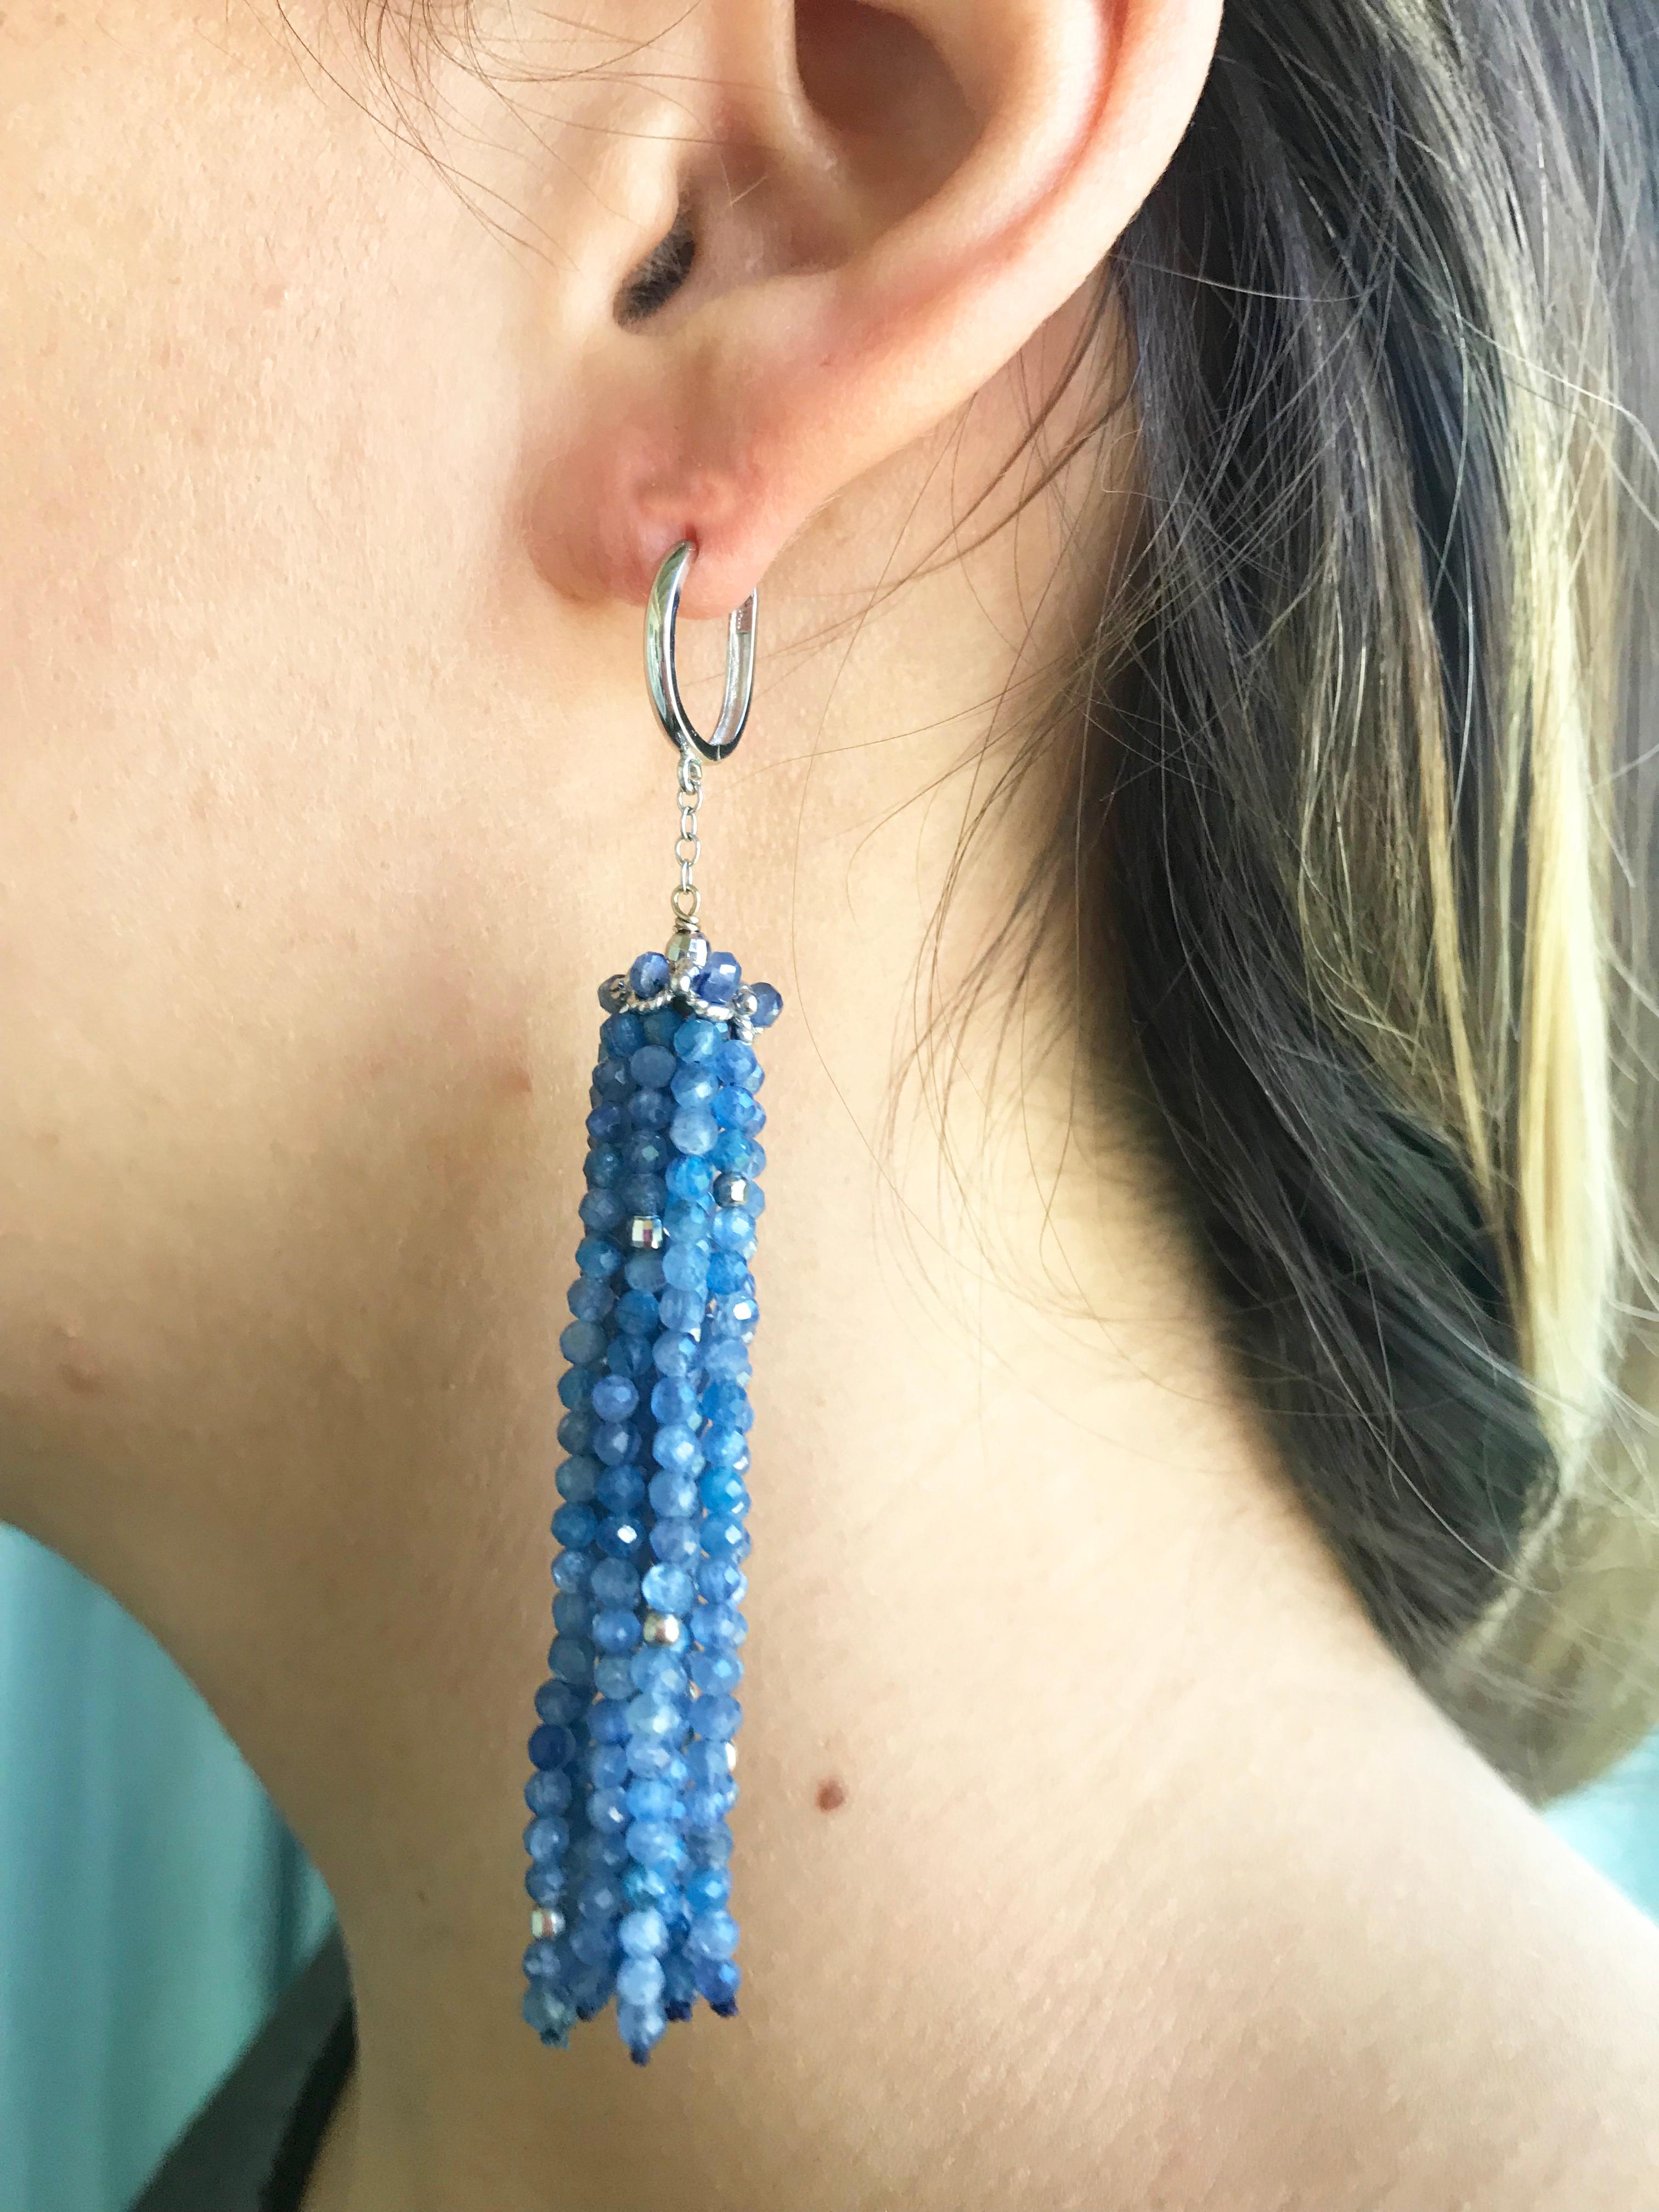 These whimsical earrings are made with kyanite beads. They are accented with a gracefully designed of 14k white gold cups that highlights the blue tone of the tassel. At 3 inches long the tassels flow beautifully in time with movement. The 14 karats